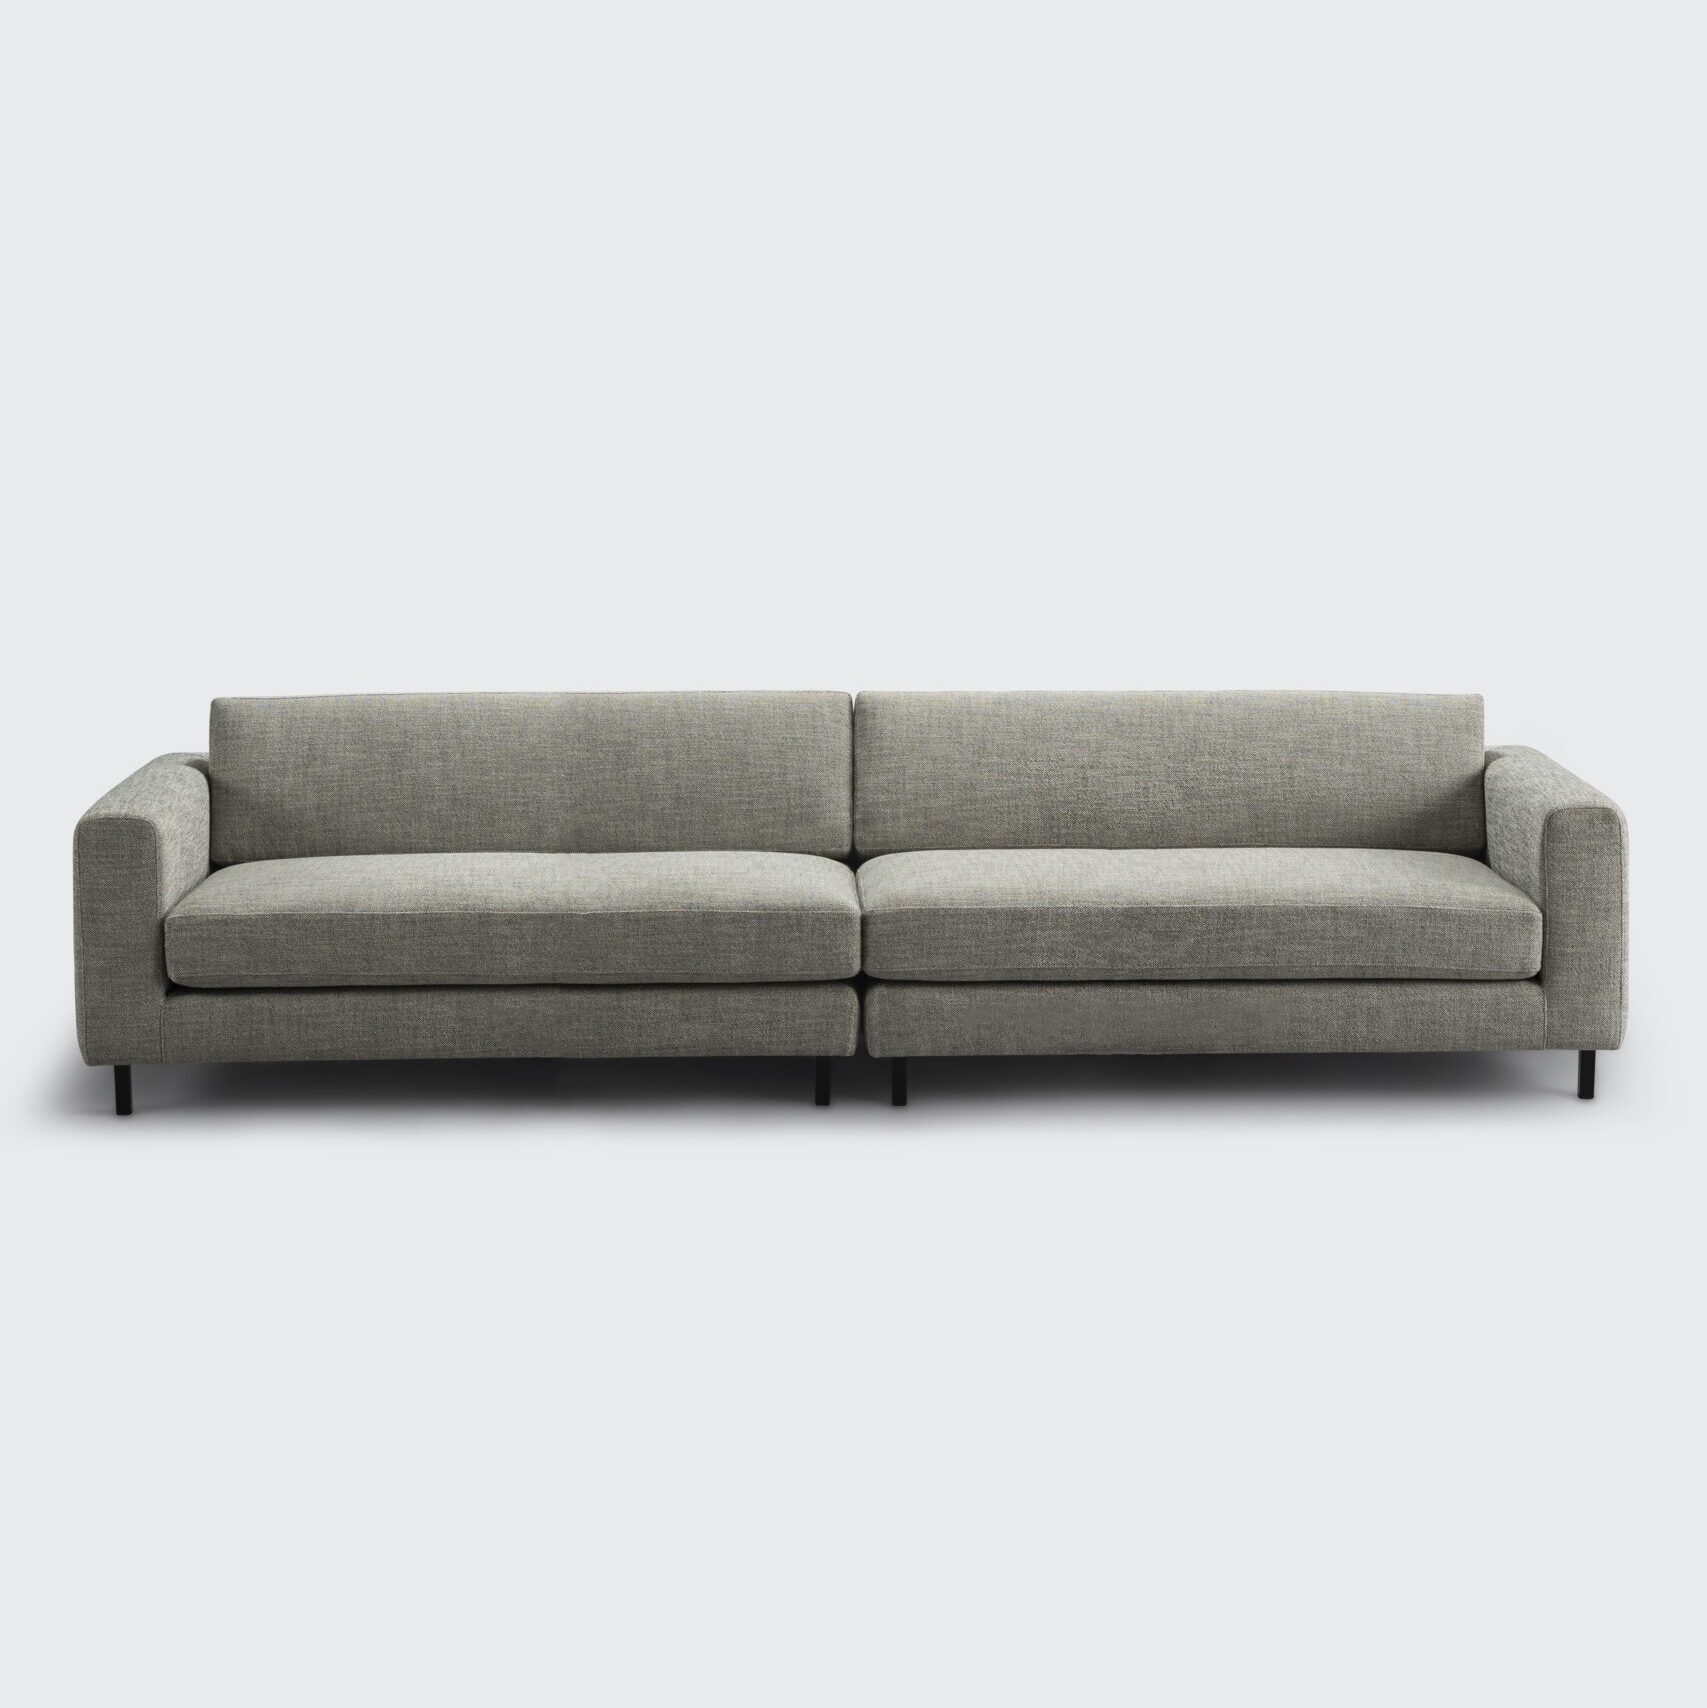 SAV sofa timeless 320 artichoke interior design architecture product furniture luxury_resistant style living room noble lined 320cm decor two separated modules timeless collection